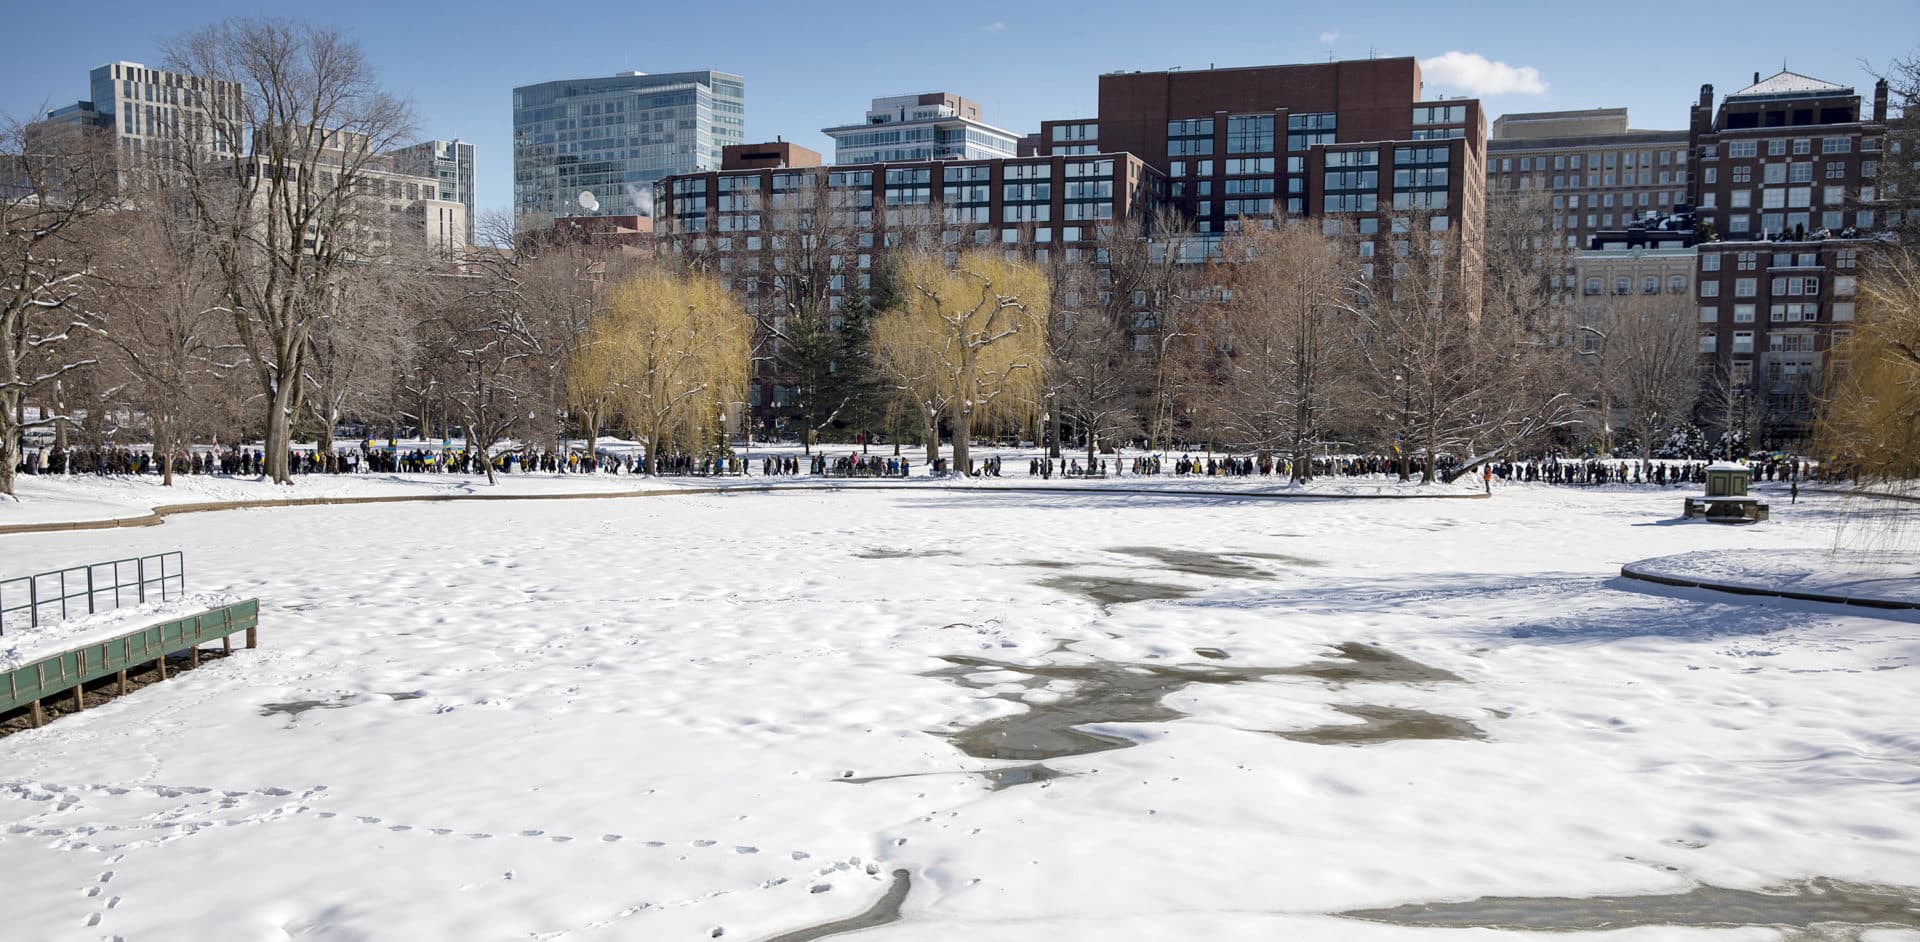 Demonstrators against the war in Ukraine walk past the swan pond on their way from the Public Garden to the Massachusetts State House. (Robin Lubbock/WBUR)